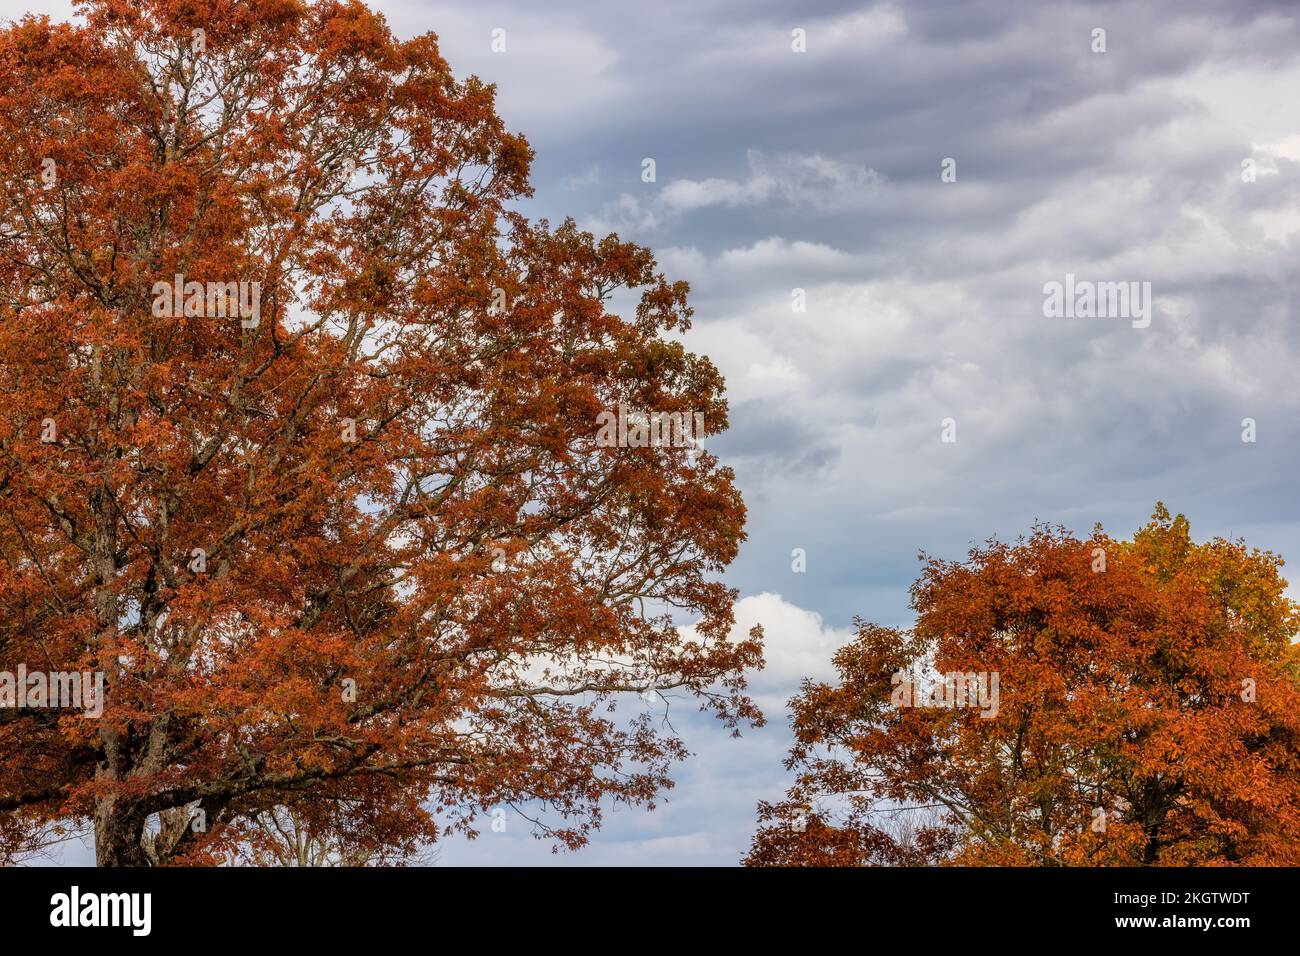 Autumn leaves on trees under cloudy skies along the North Carolina Blue Ridge Parkway. Stock Photo